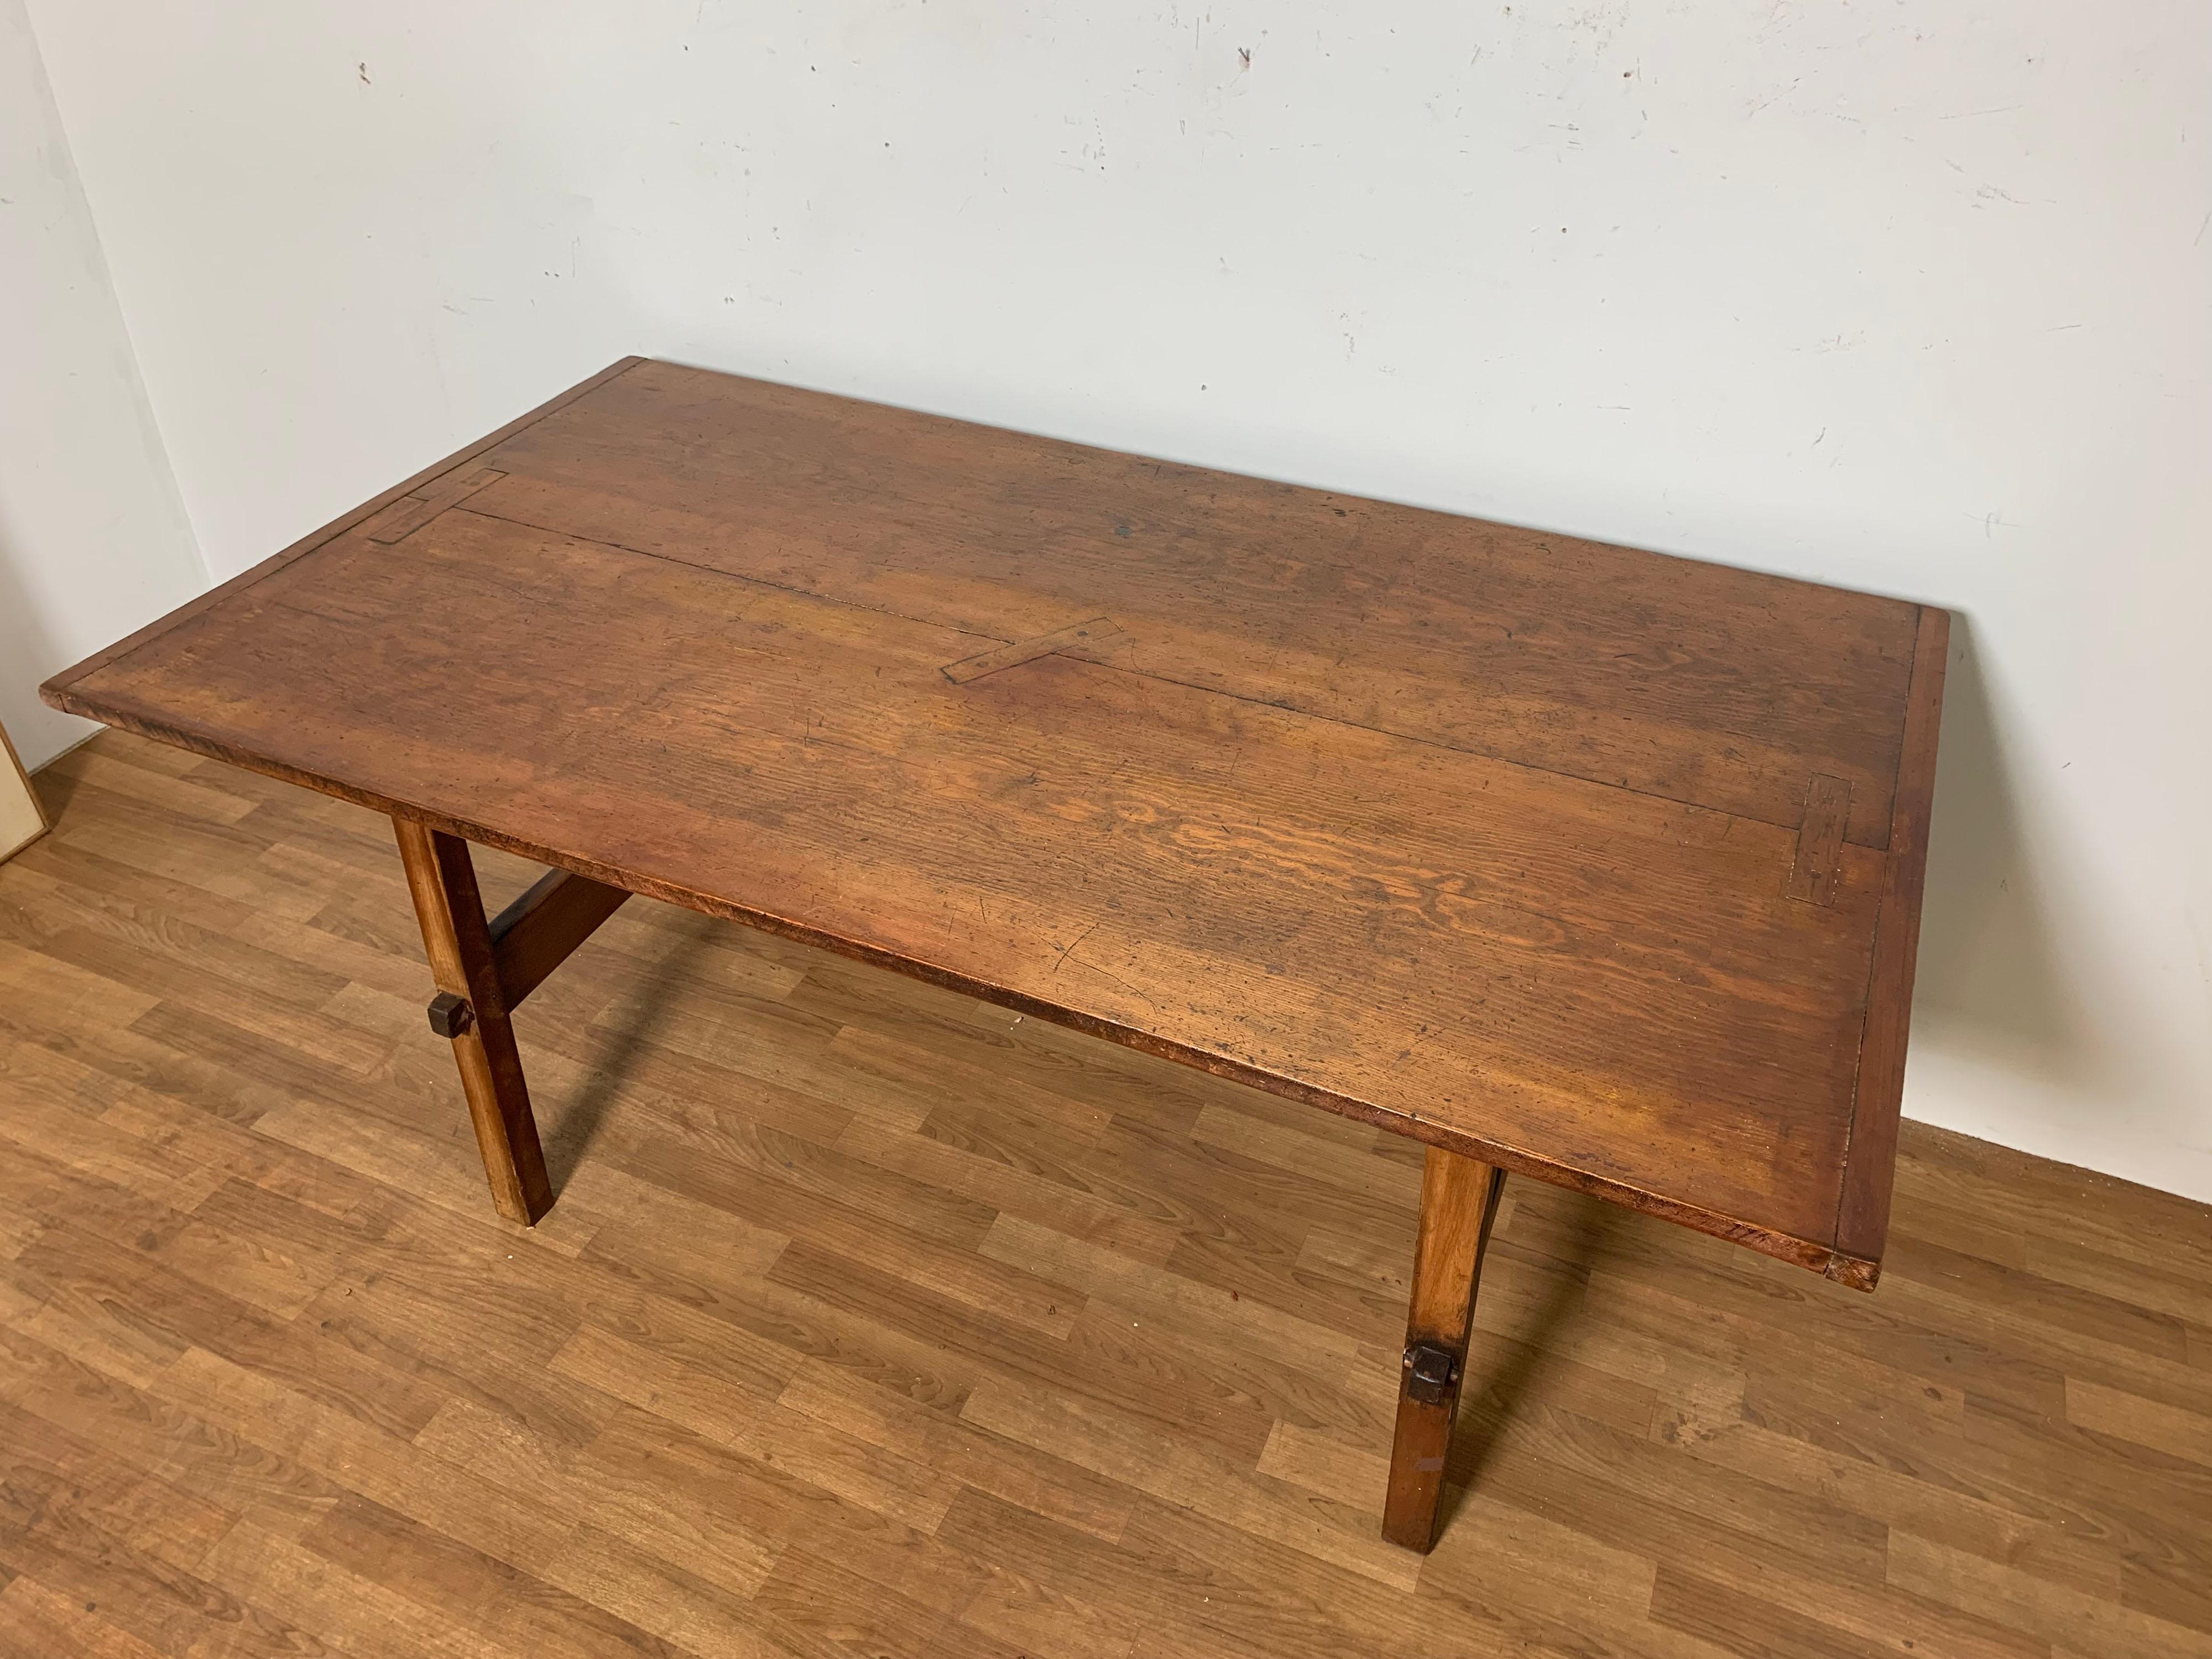 An exceptional 18th century pine farm table from the historic Baker-Sutton House in Ipswich Massachusetts features two wide pine boards of exceptional amber color with key joinery and breadboard ends. The top is of early New England construction,